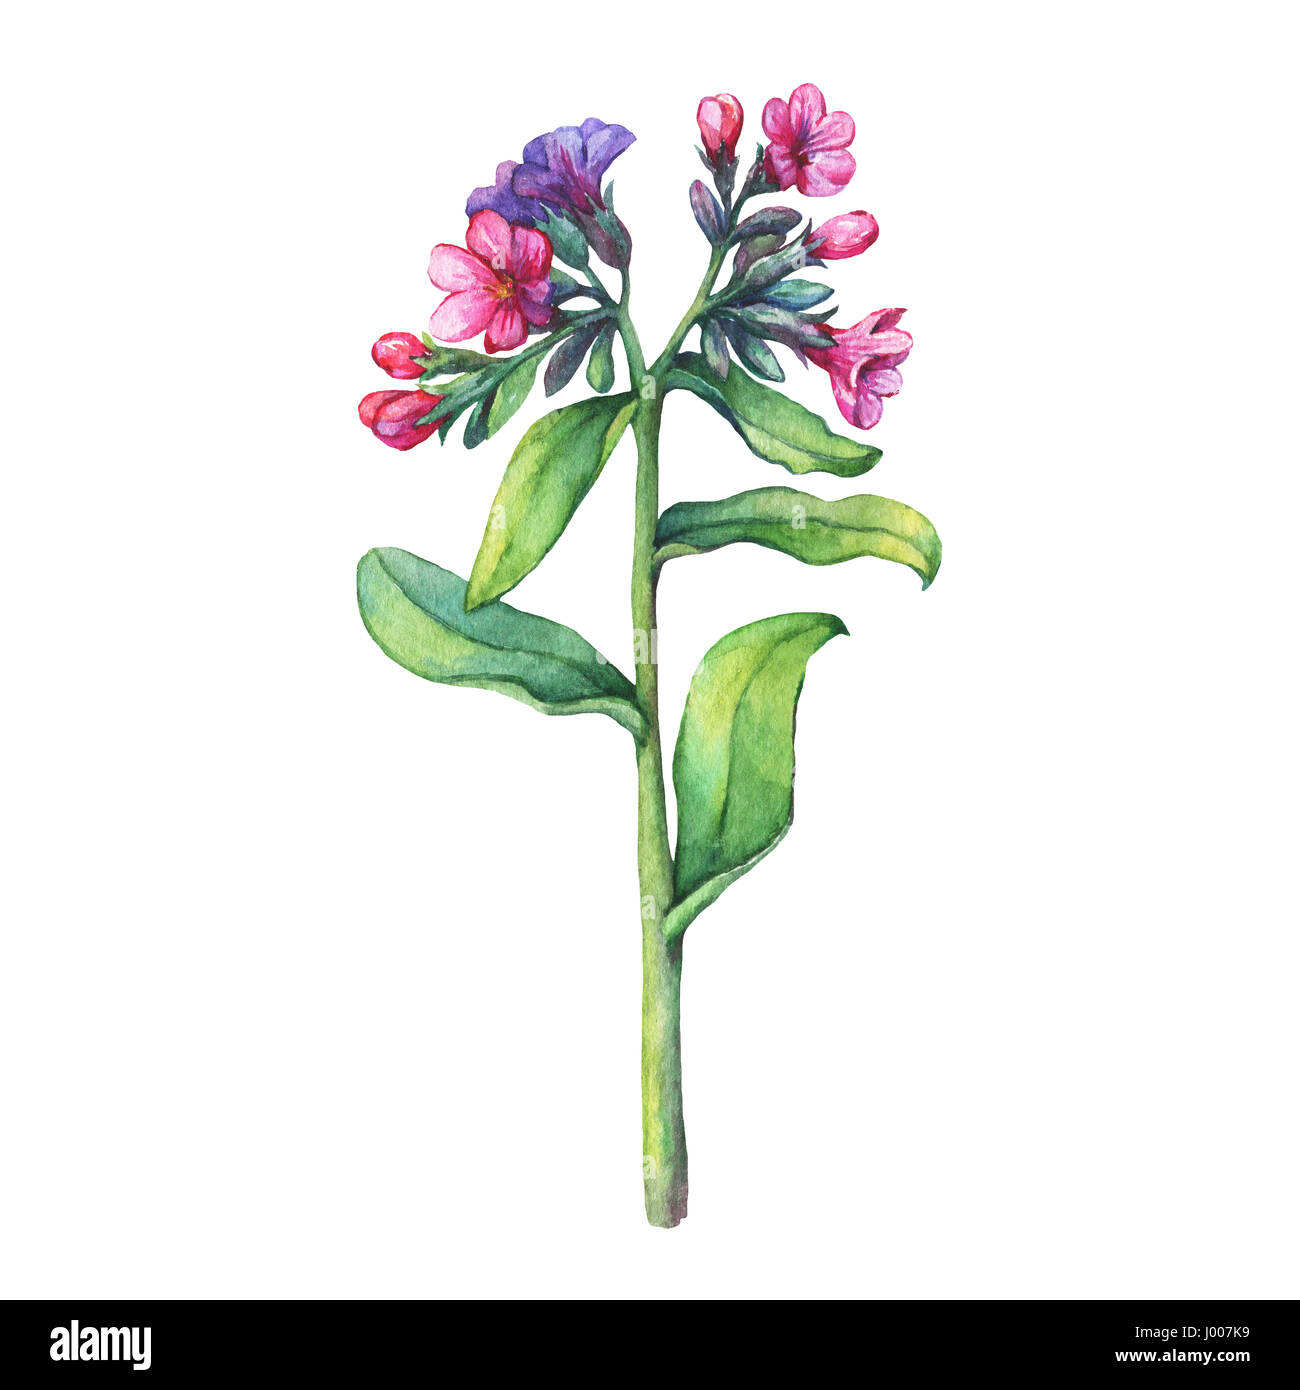 Illustration of first spring wild flowers - Dark lungwort medicinal (Pulmonaria officinalis). Hand drawn watercolor painting on white background. Stock Photo